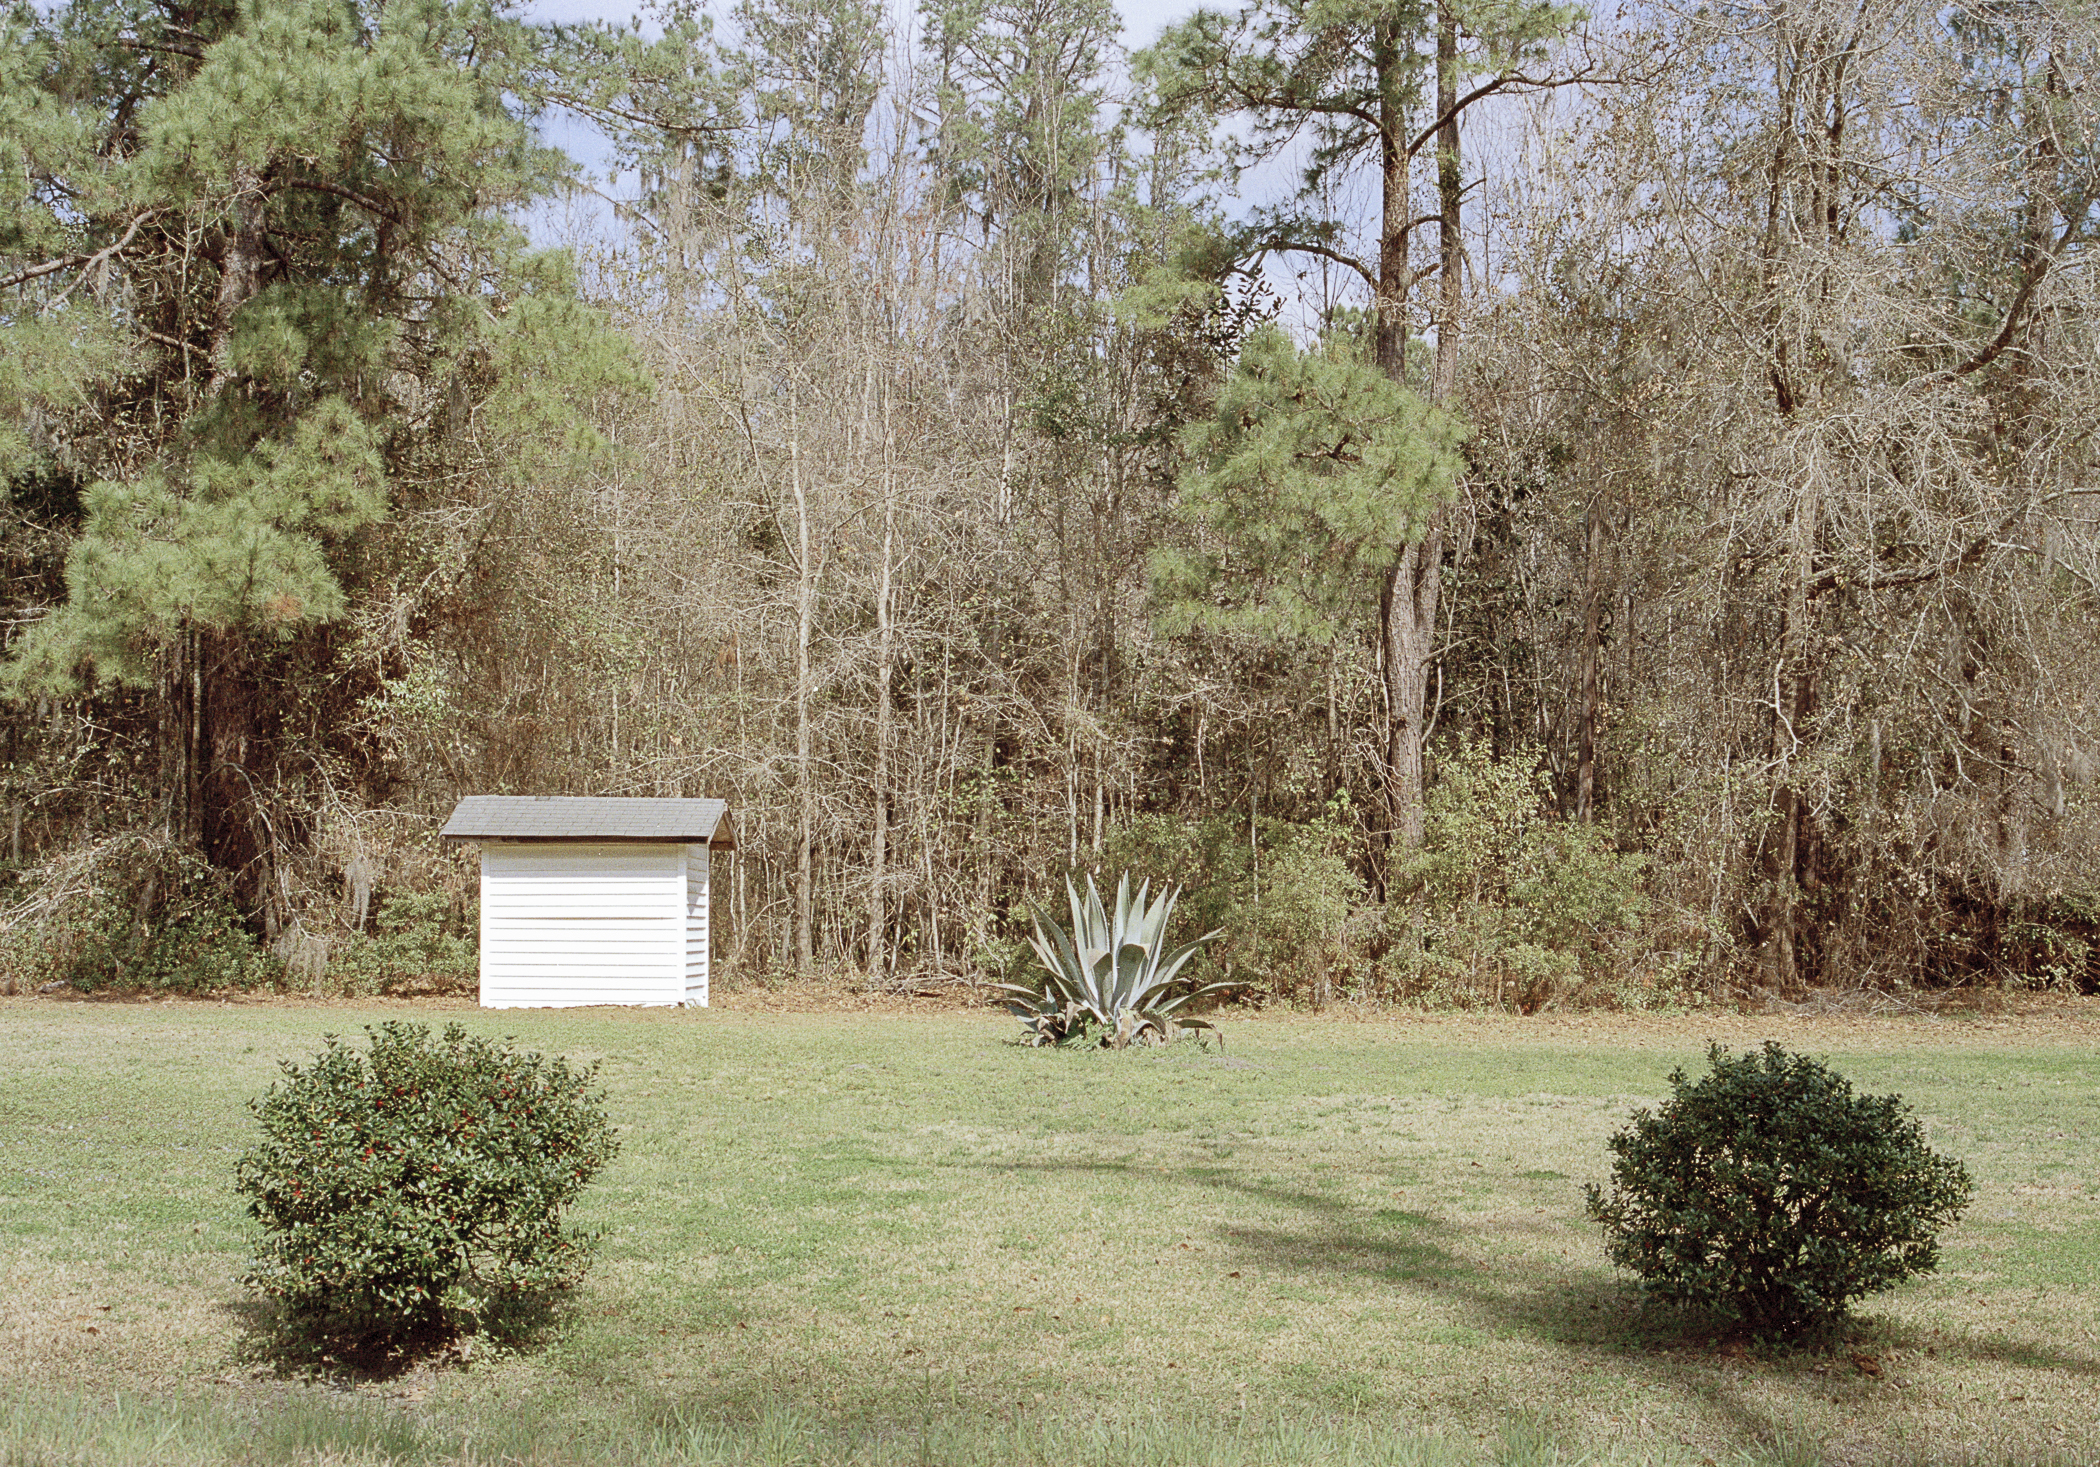 two bushes and one white shed.jpg